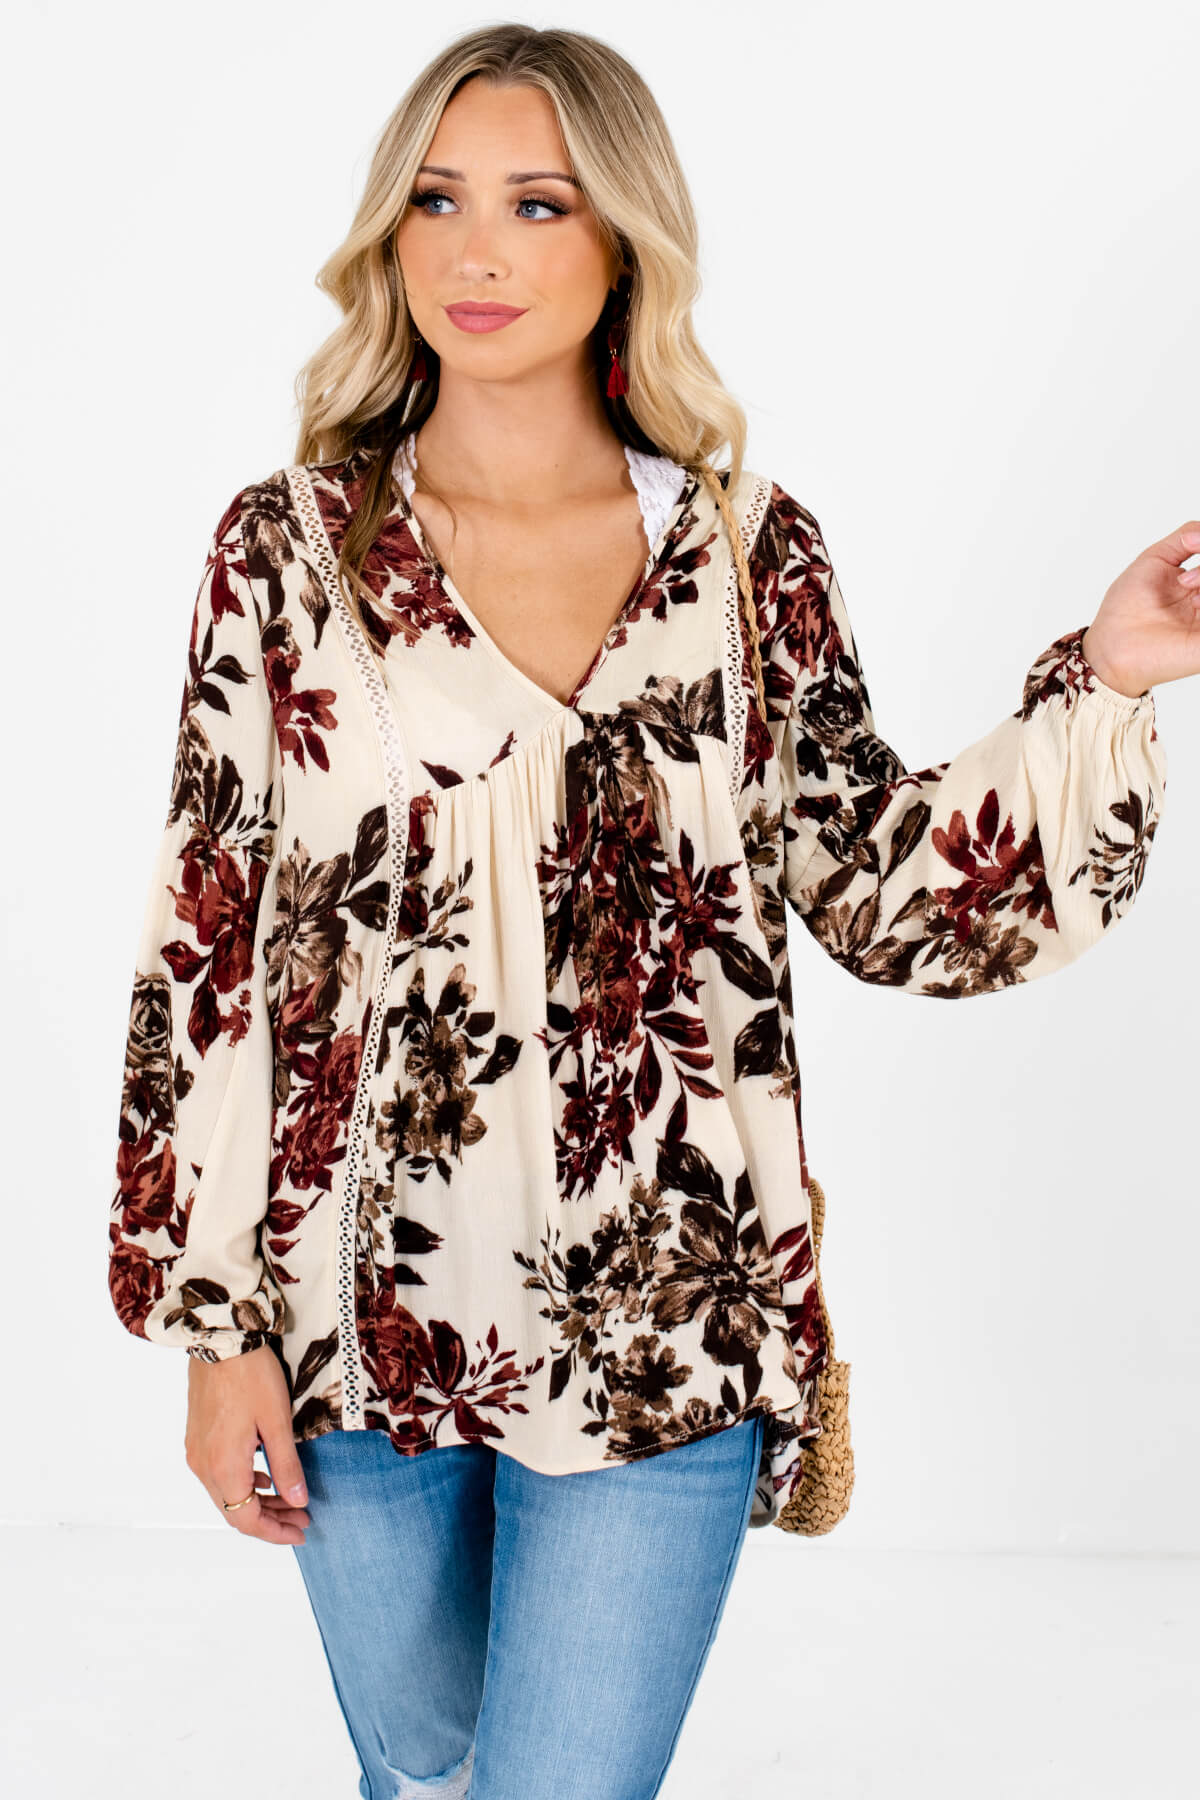 Cream Burgundy Brown Floral Peasant Blouses for Autumn